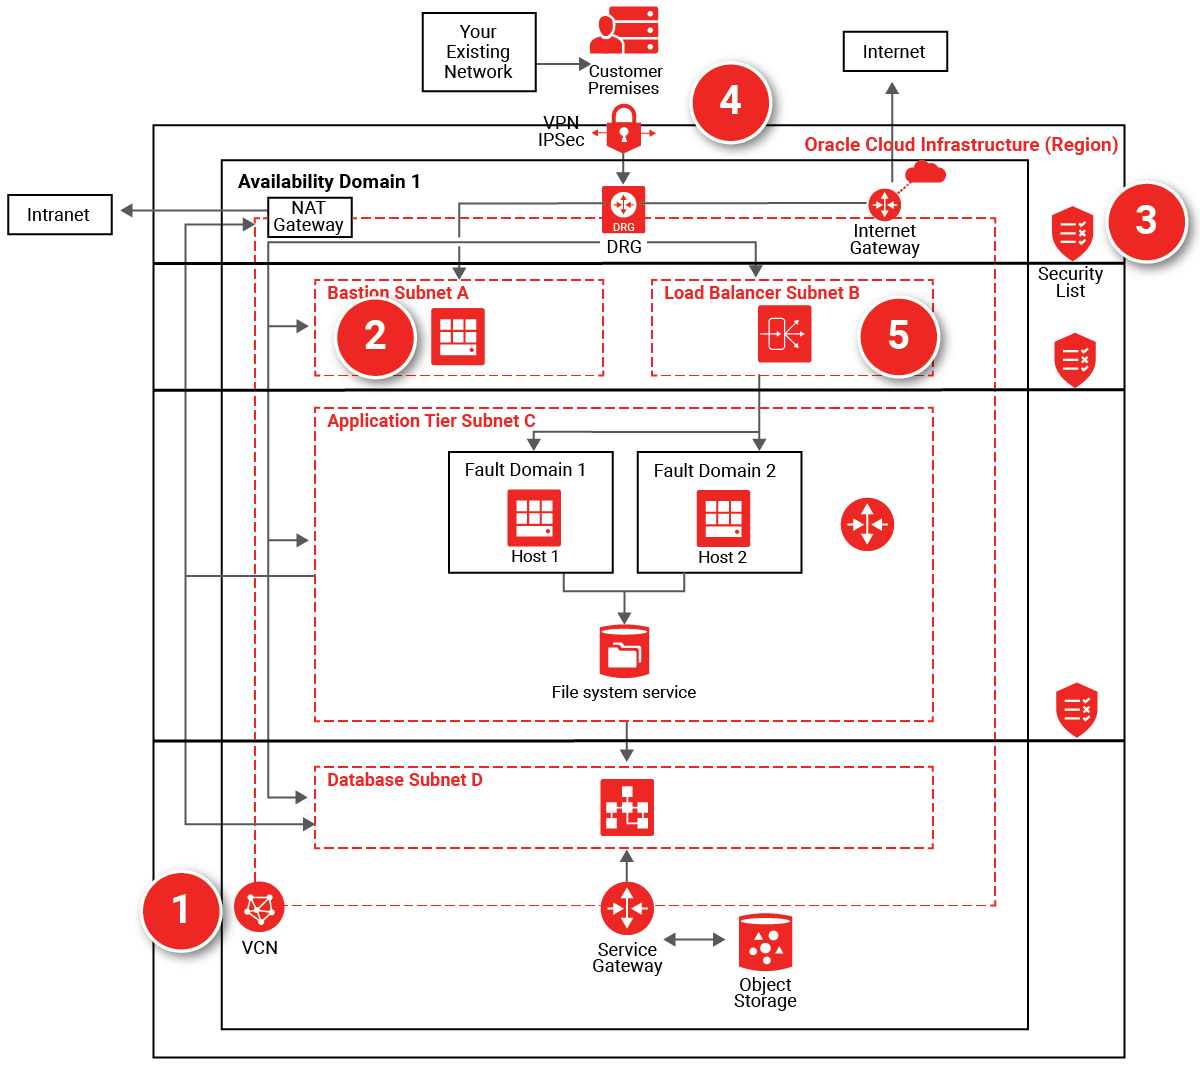 Reference Network and Connectivity Architecture